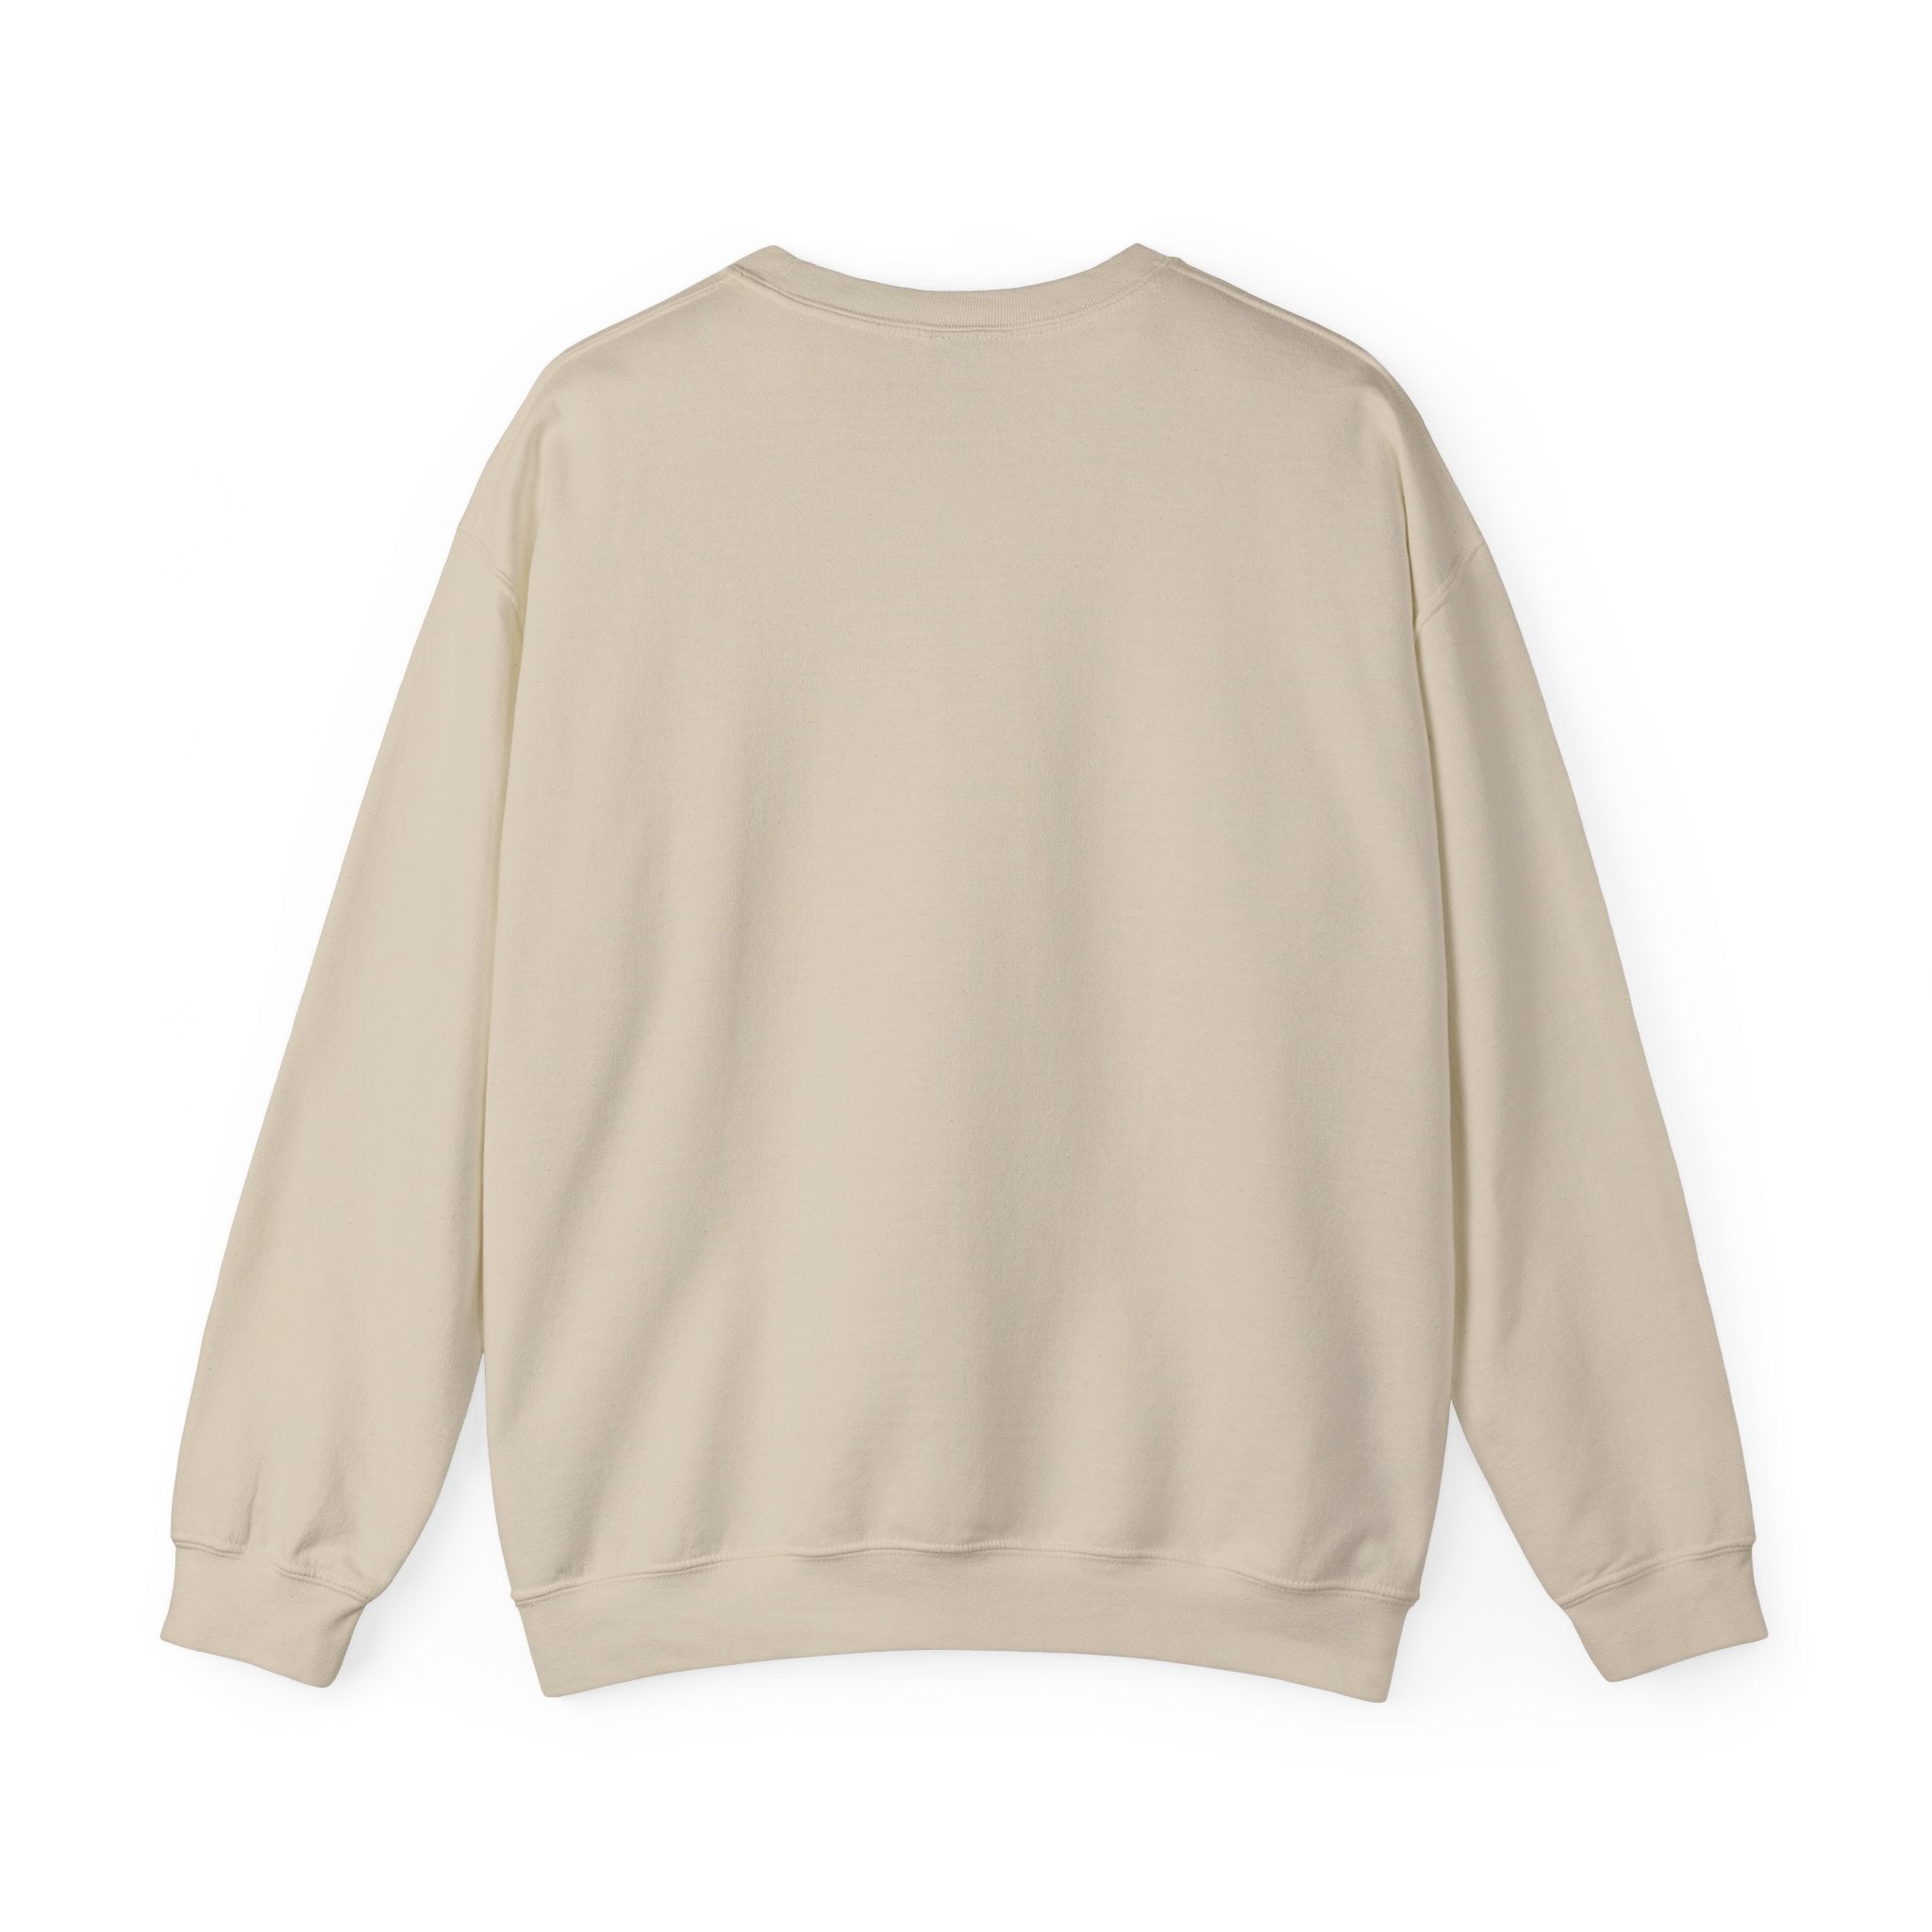 Back view of a plain beige RG-B - Sweatshirt with elastic cuffs and hem, perfect for comfort lovers, displayed on a white background.